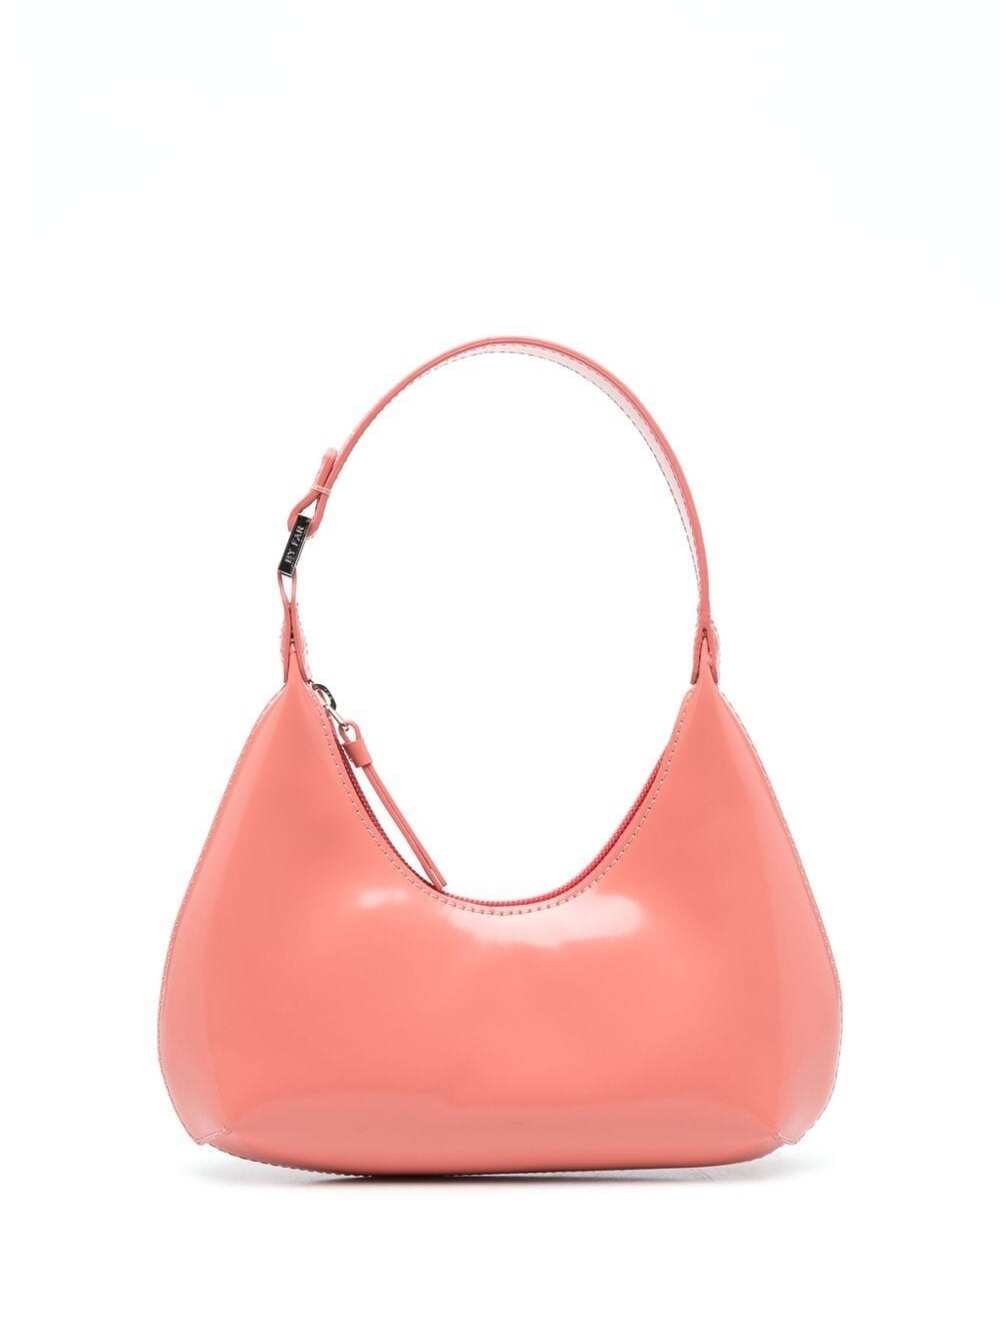 BY FAR Amber Light Pink Handbag In Patent Leather With Adjustable Handle And Zip Closure Woman